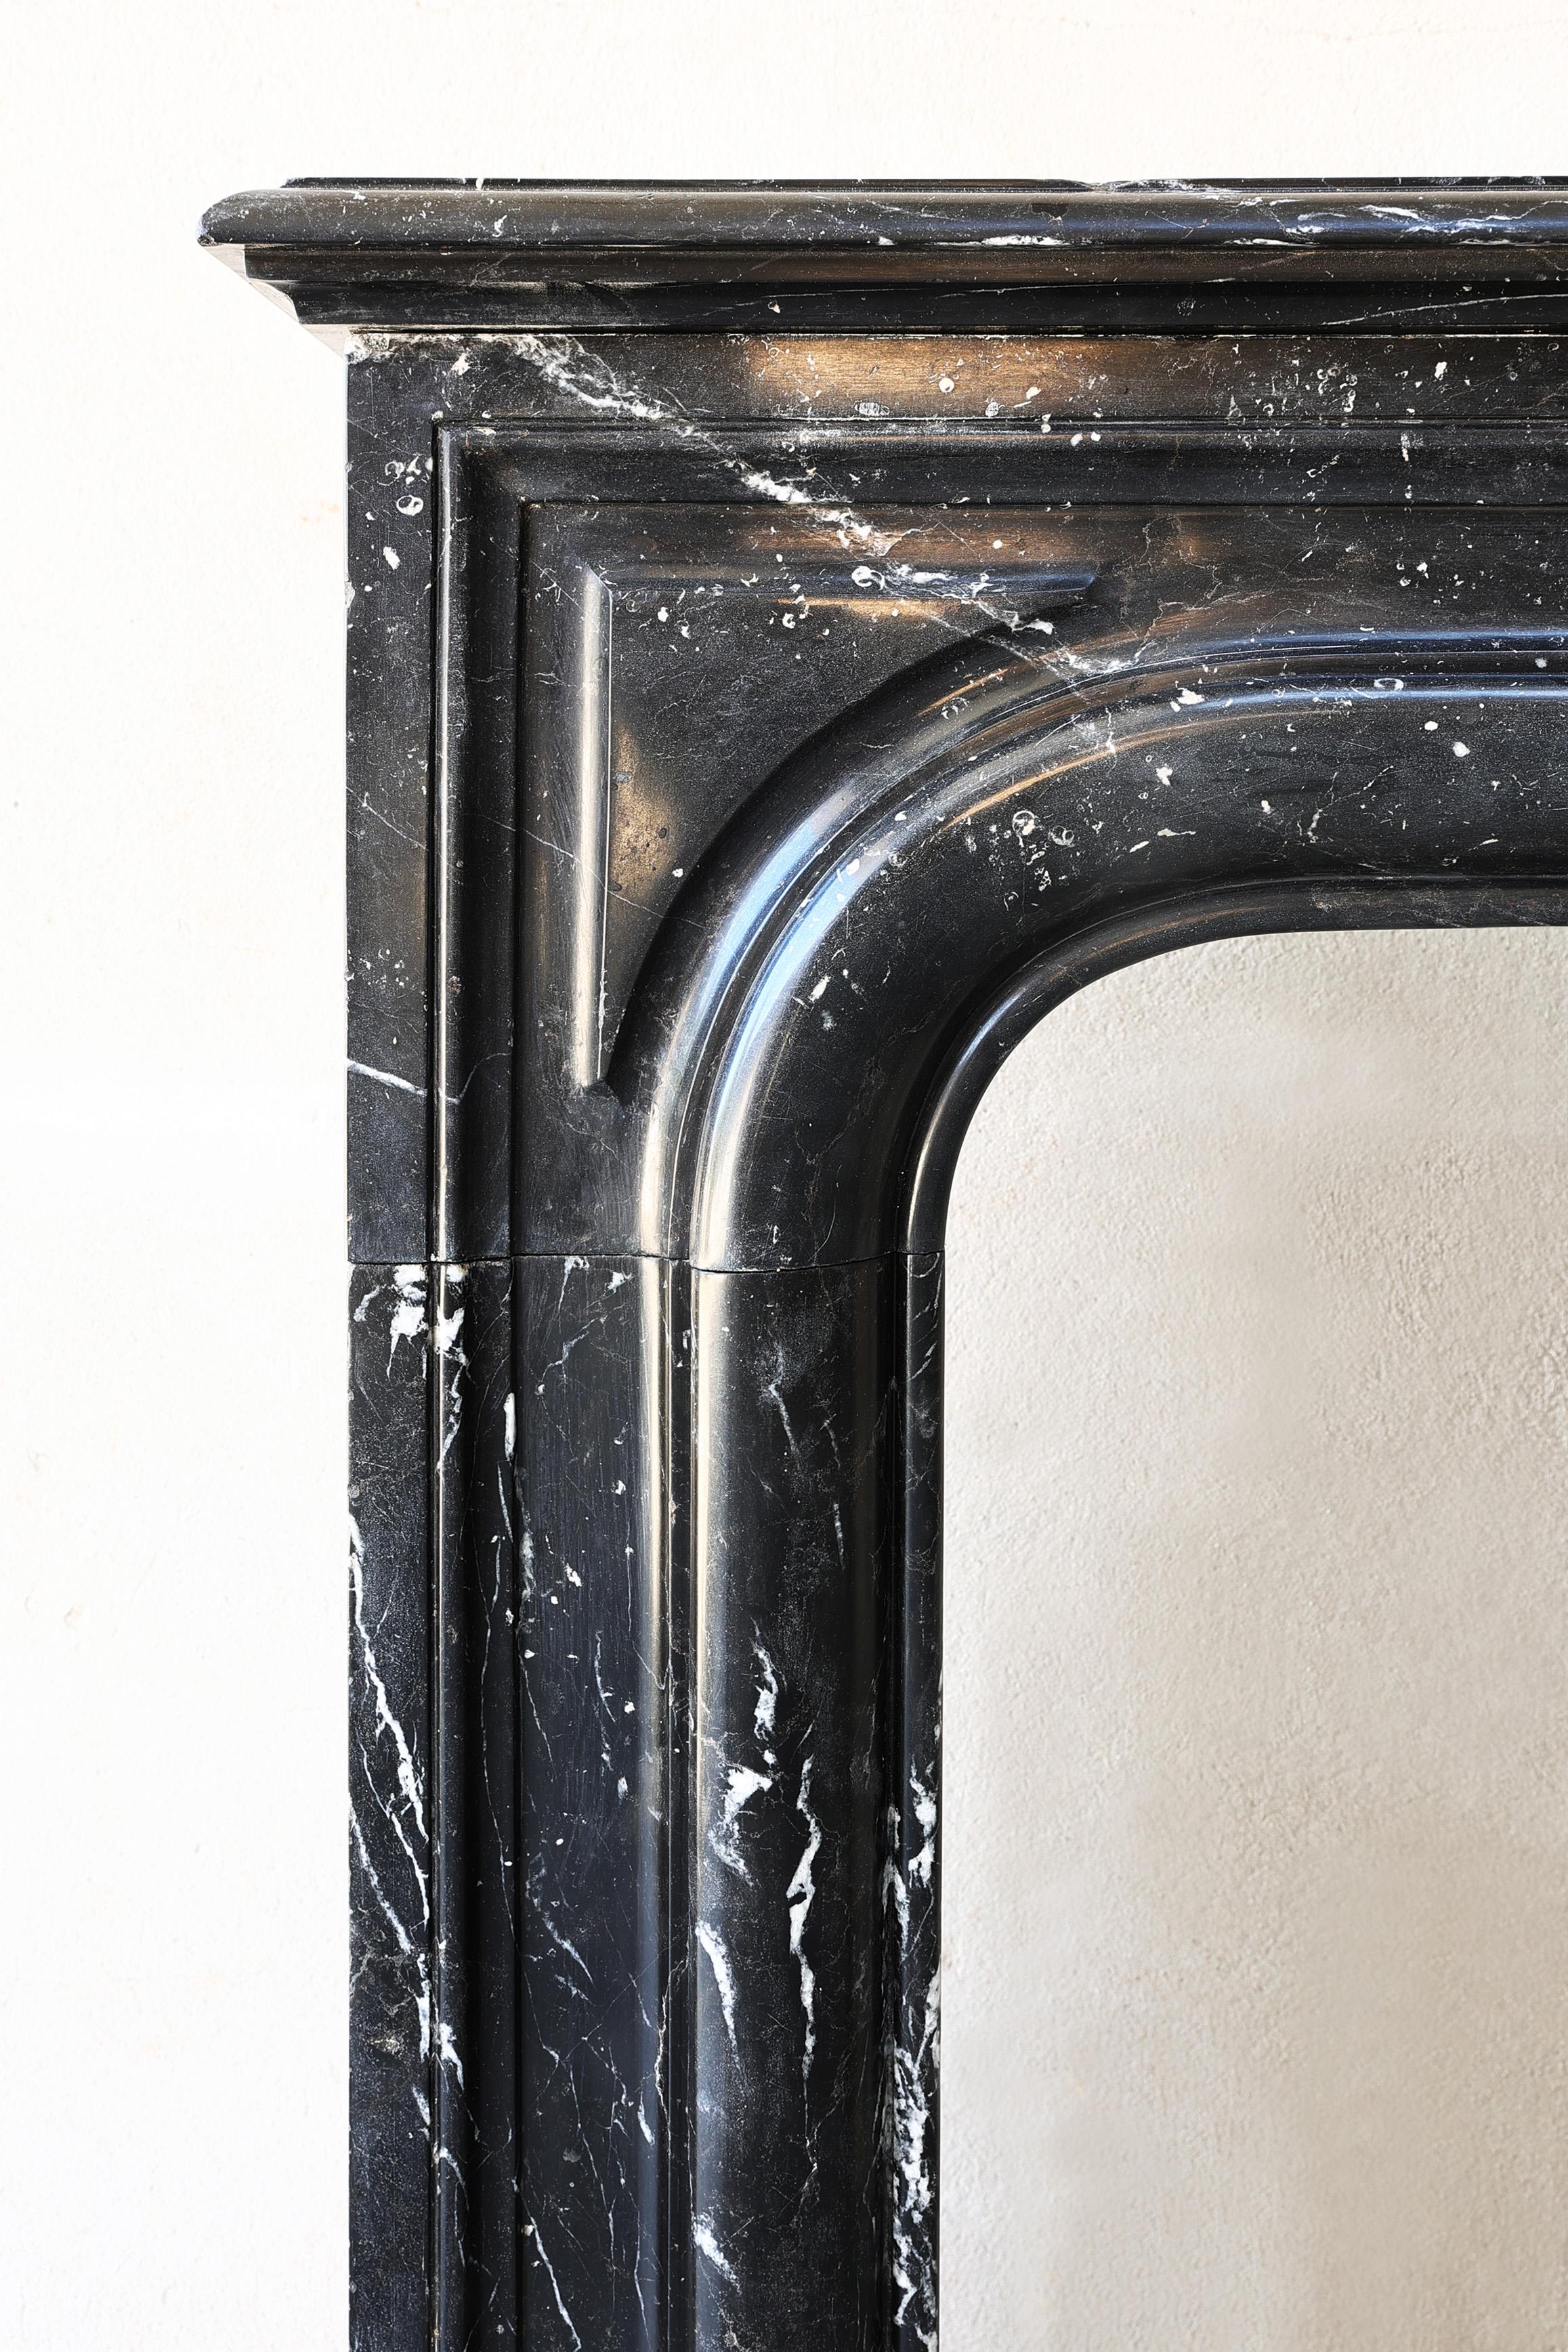 Beautiful antique fireplace from the 19th century made of Nero Marquina marble! This mantelpiece has a chic appearance and is in the style of Louis XIV. This mantelpiece has a warm and rustic appearance and fits into a modern or classic interior.